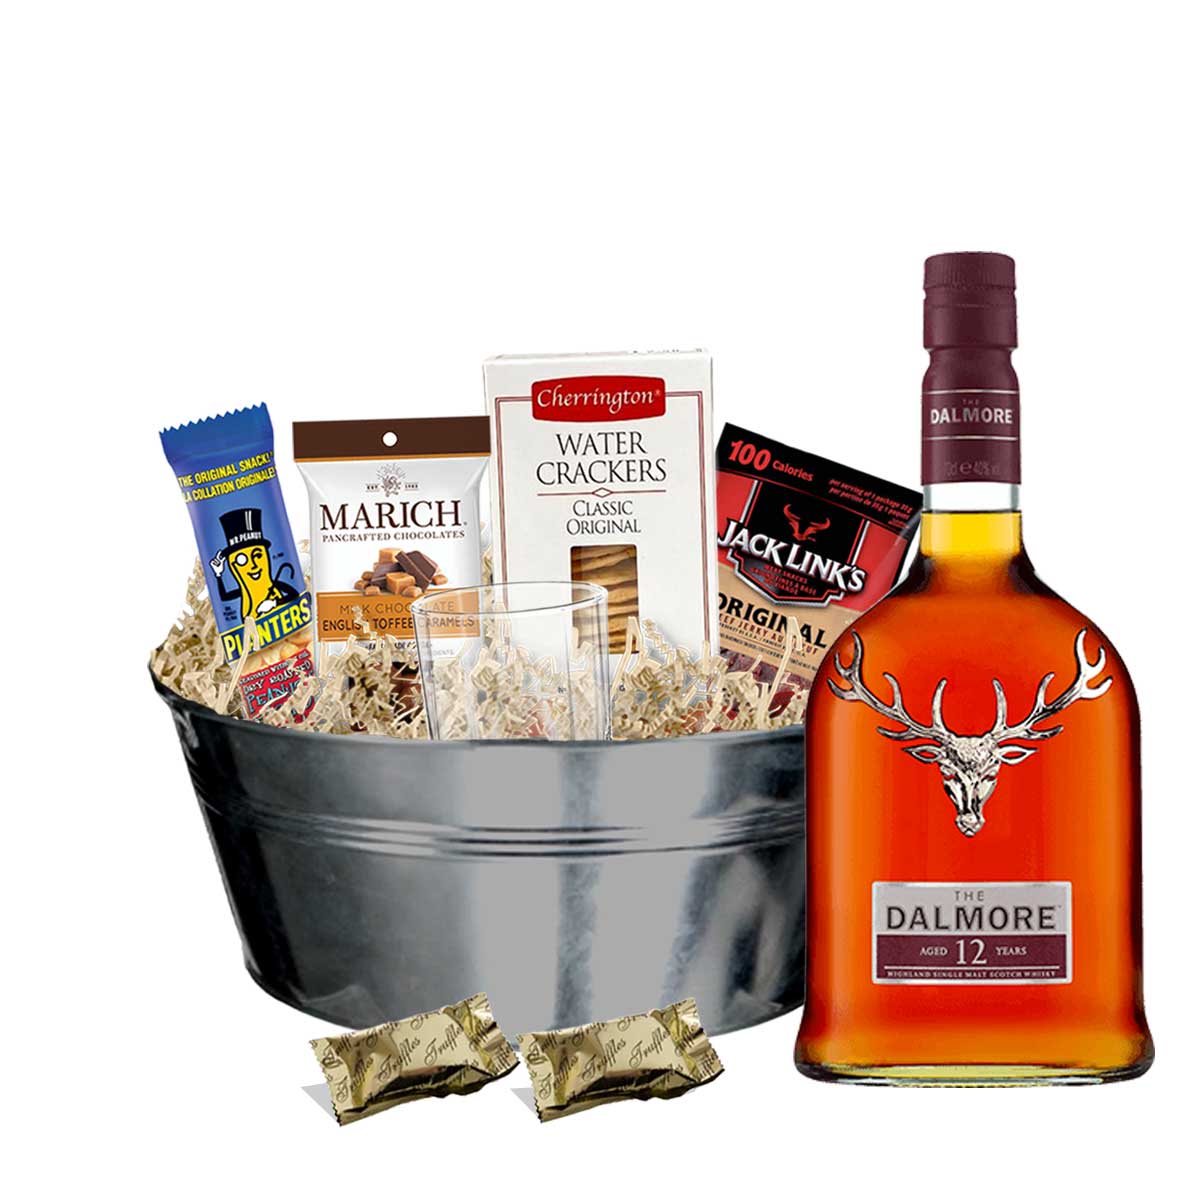 TAG Liquor Stores BC - Dalmore 12 Year Old Scotch Whisky 750ml Gift Basket